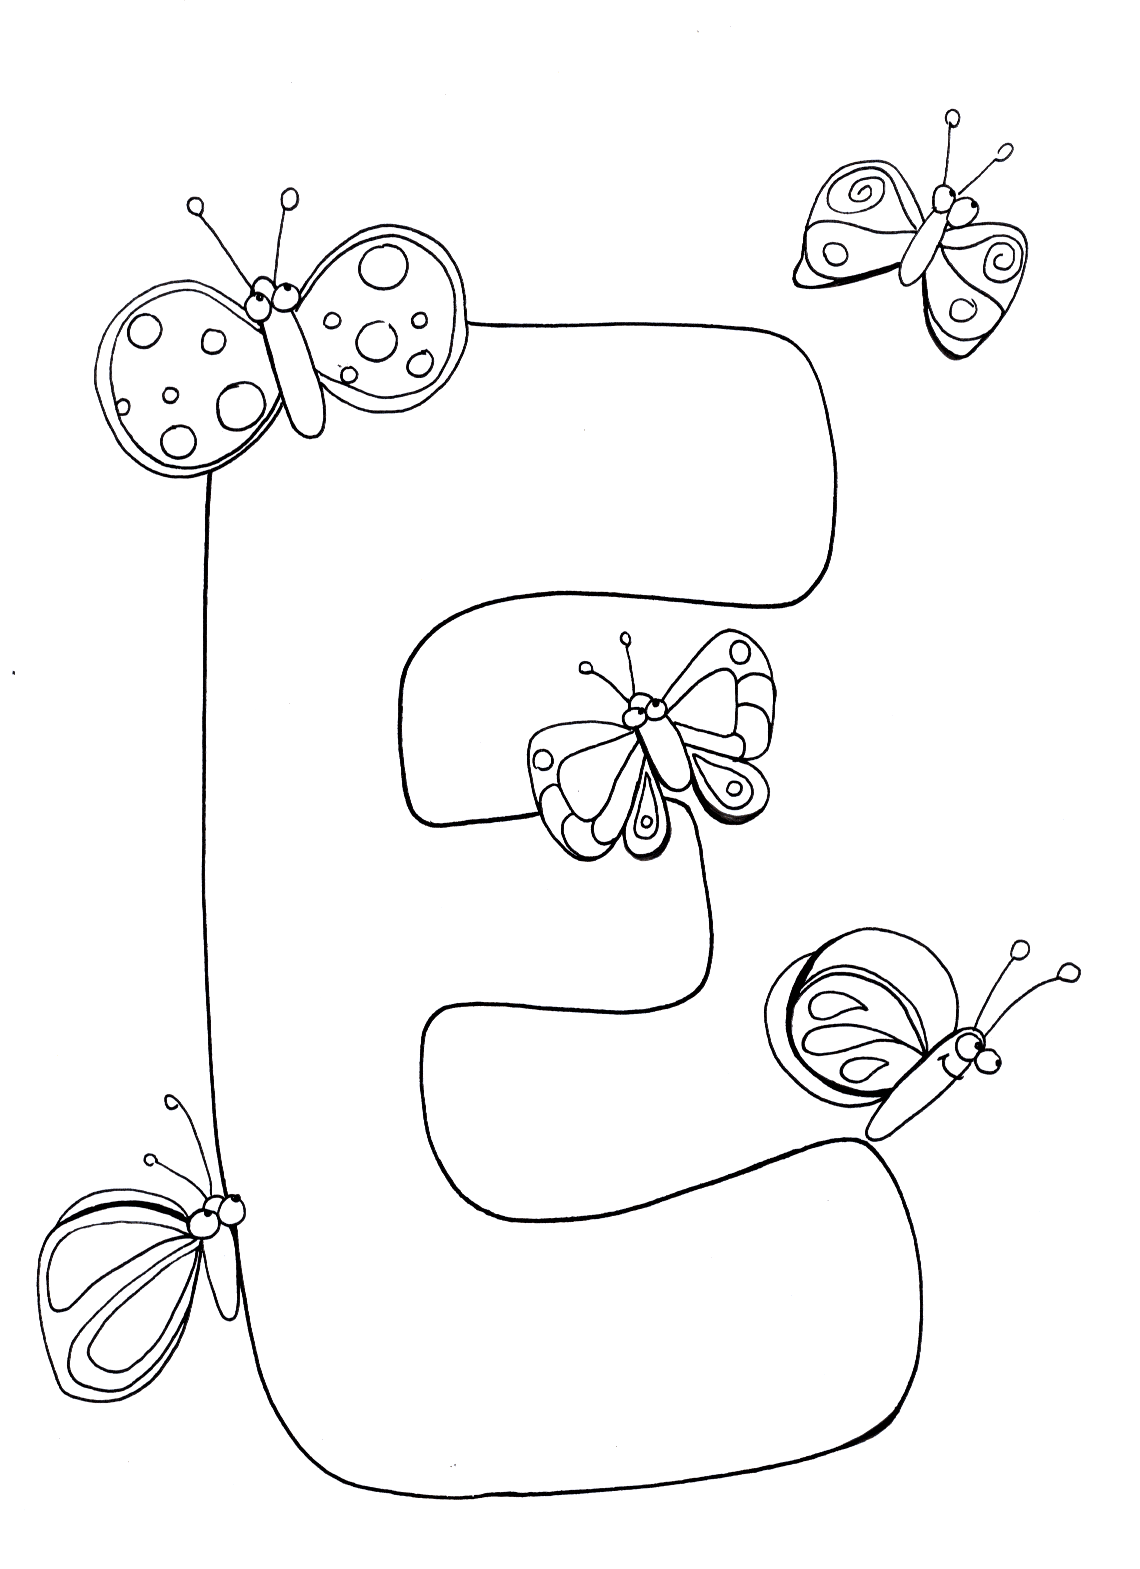 e coloring pages for kids - photo #10